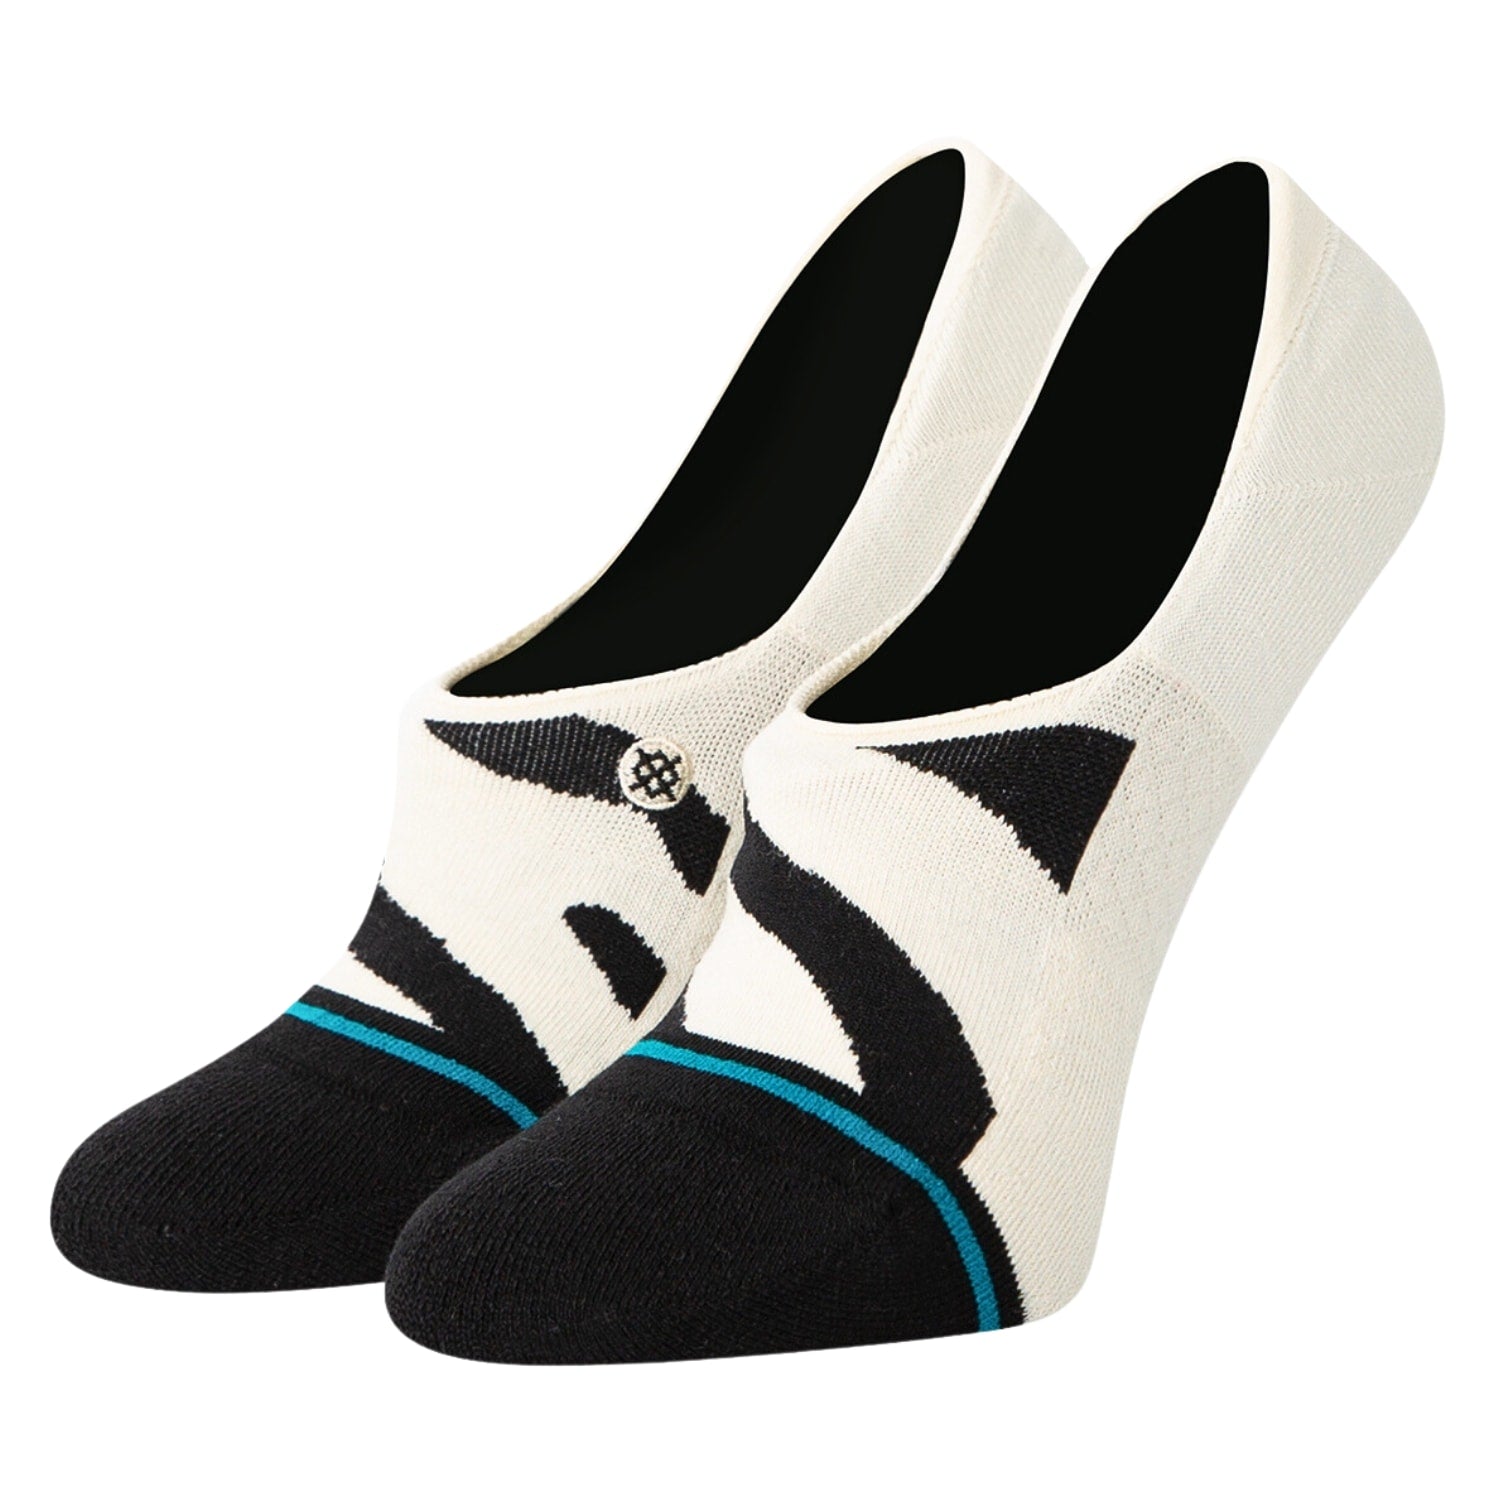 Stance Womens Ze No Show/Invisible Socks - Off White - Womens Invisible/No Show Socks by Stance